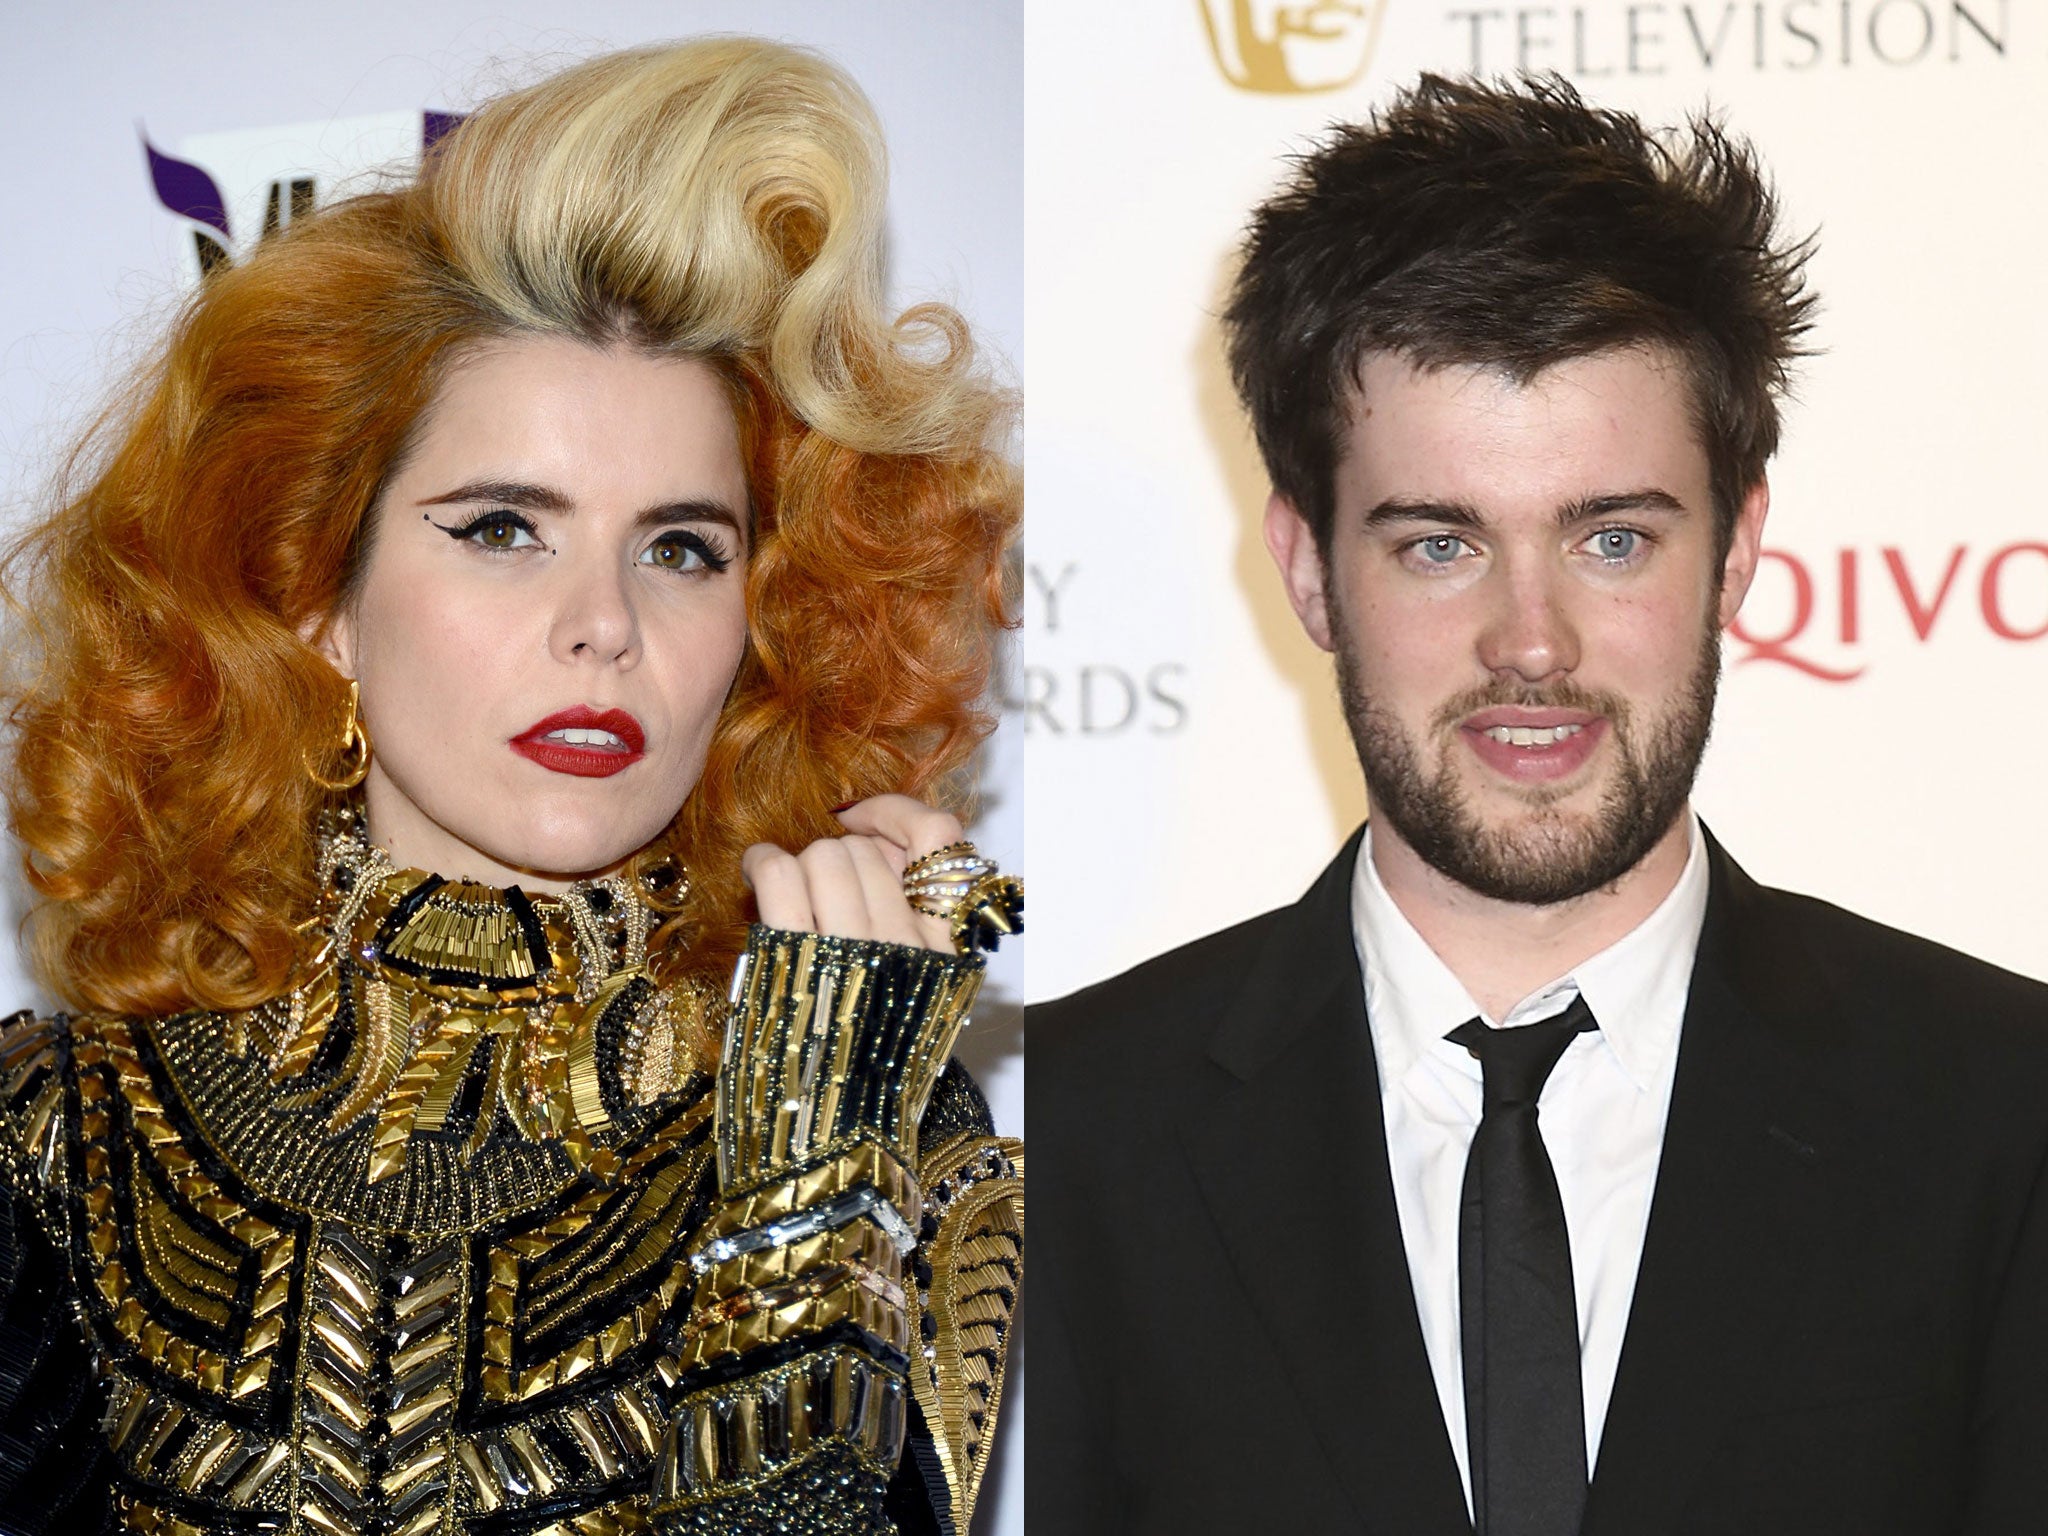 Paloma Faith would put Fifty Shades of Grey in Room 101; comedian Jack Whitehall hates 'glamping'